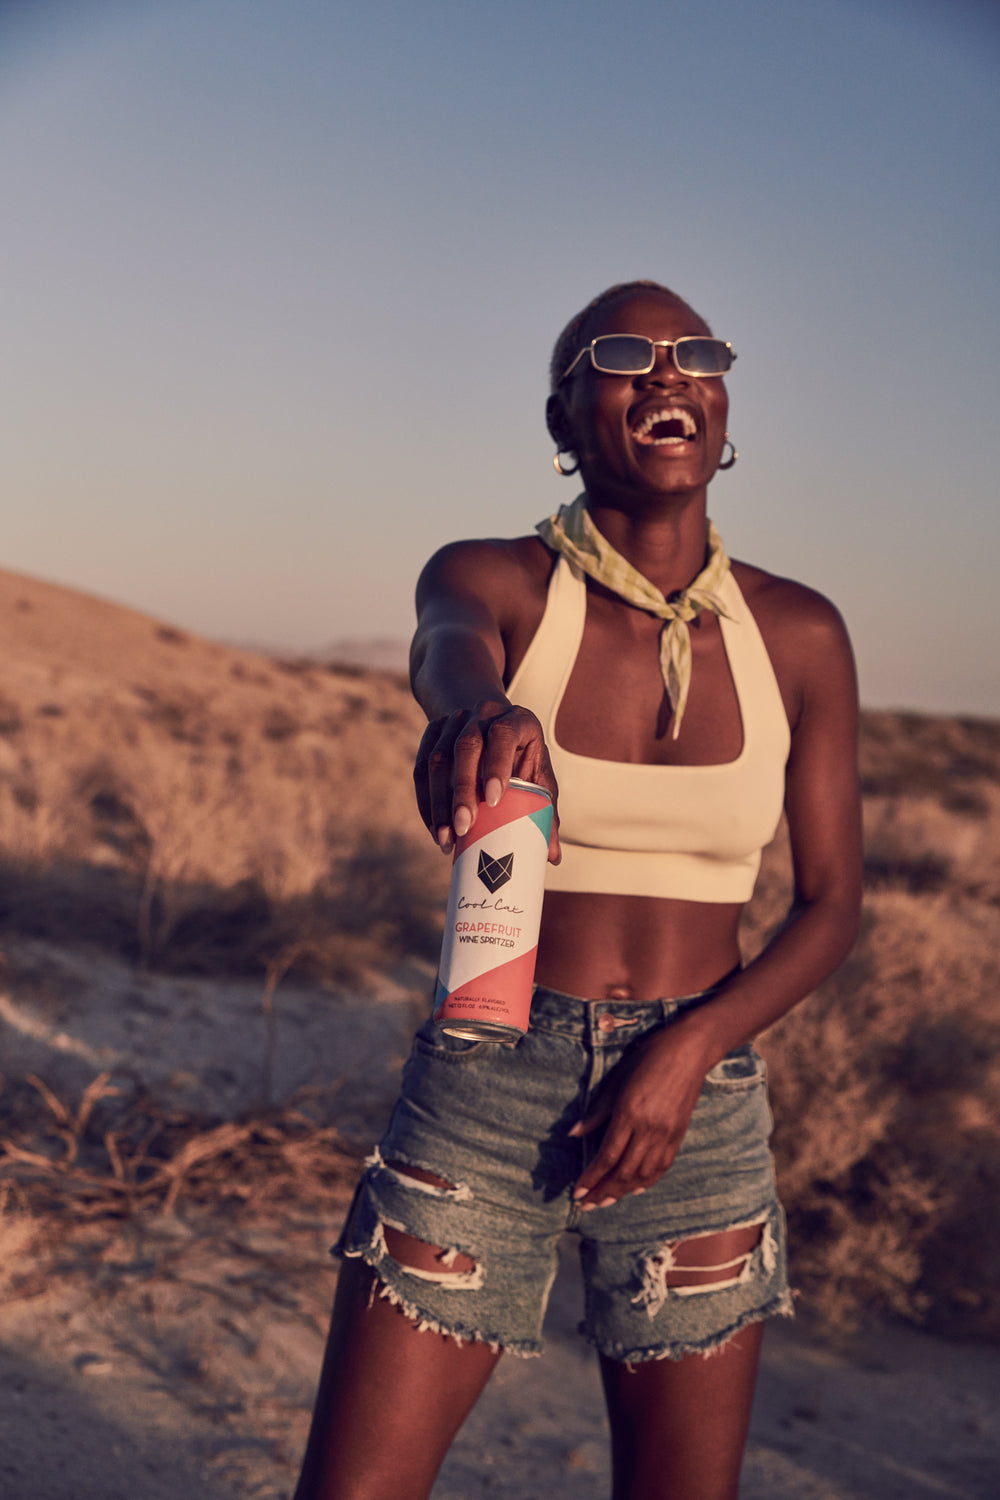 Ashley Byrd holds a Grapefruit can of Cool Cat wine spritzer in the desert.